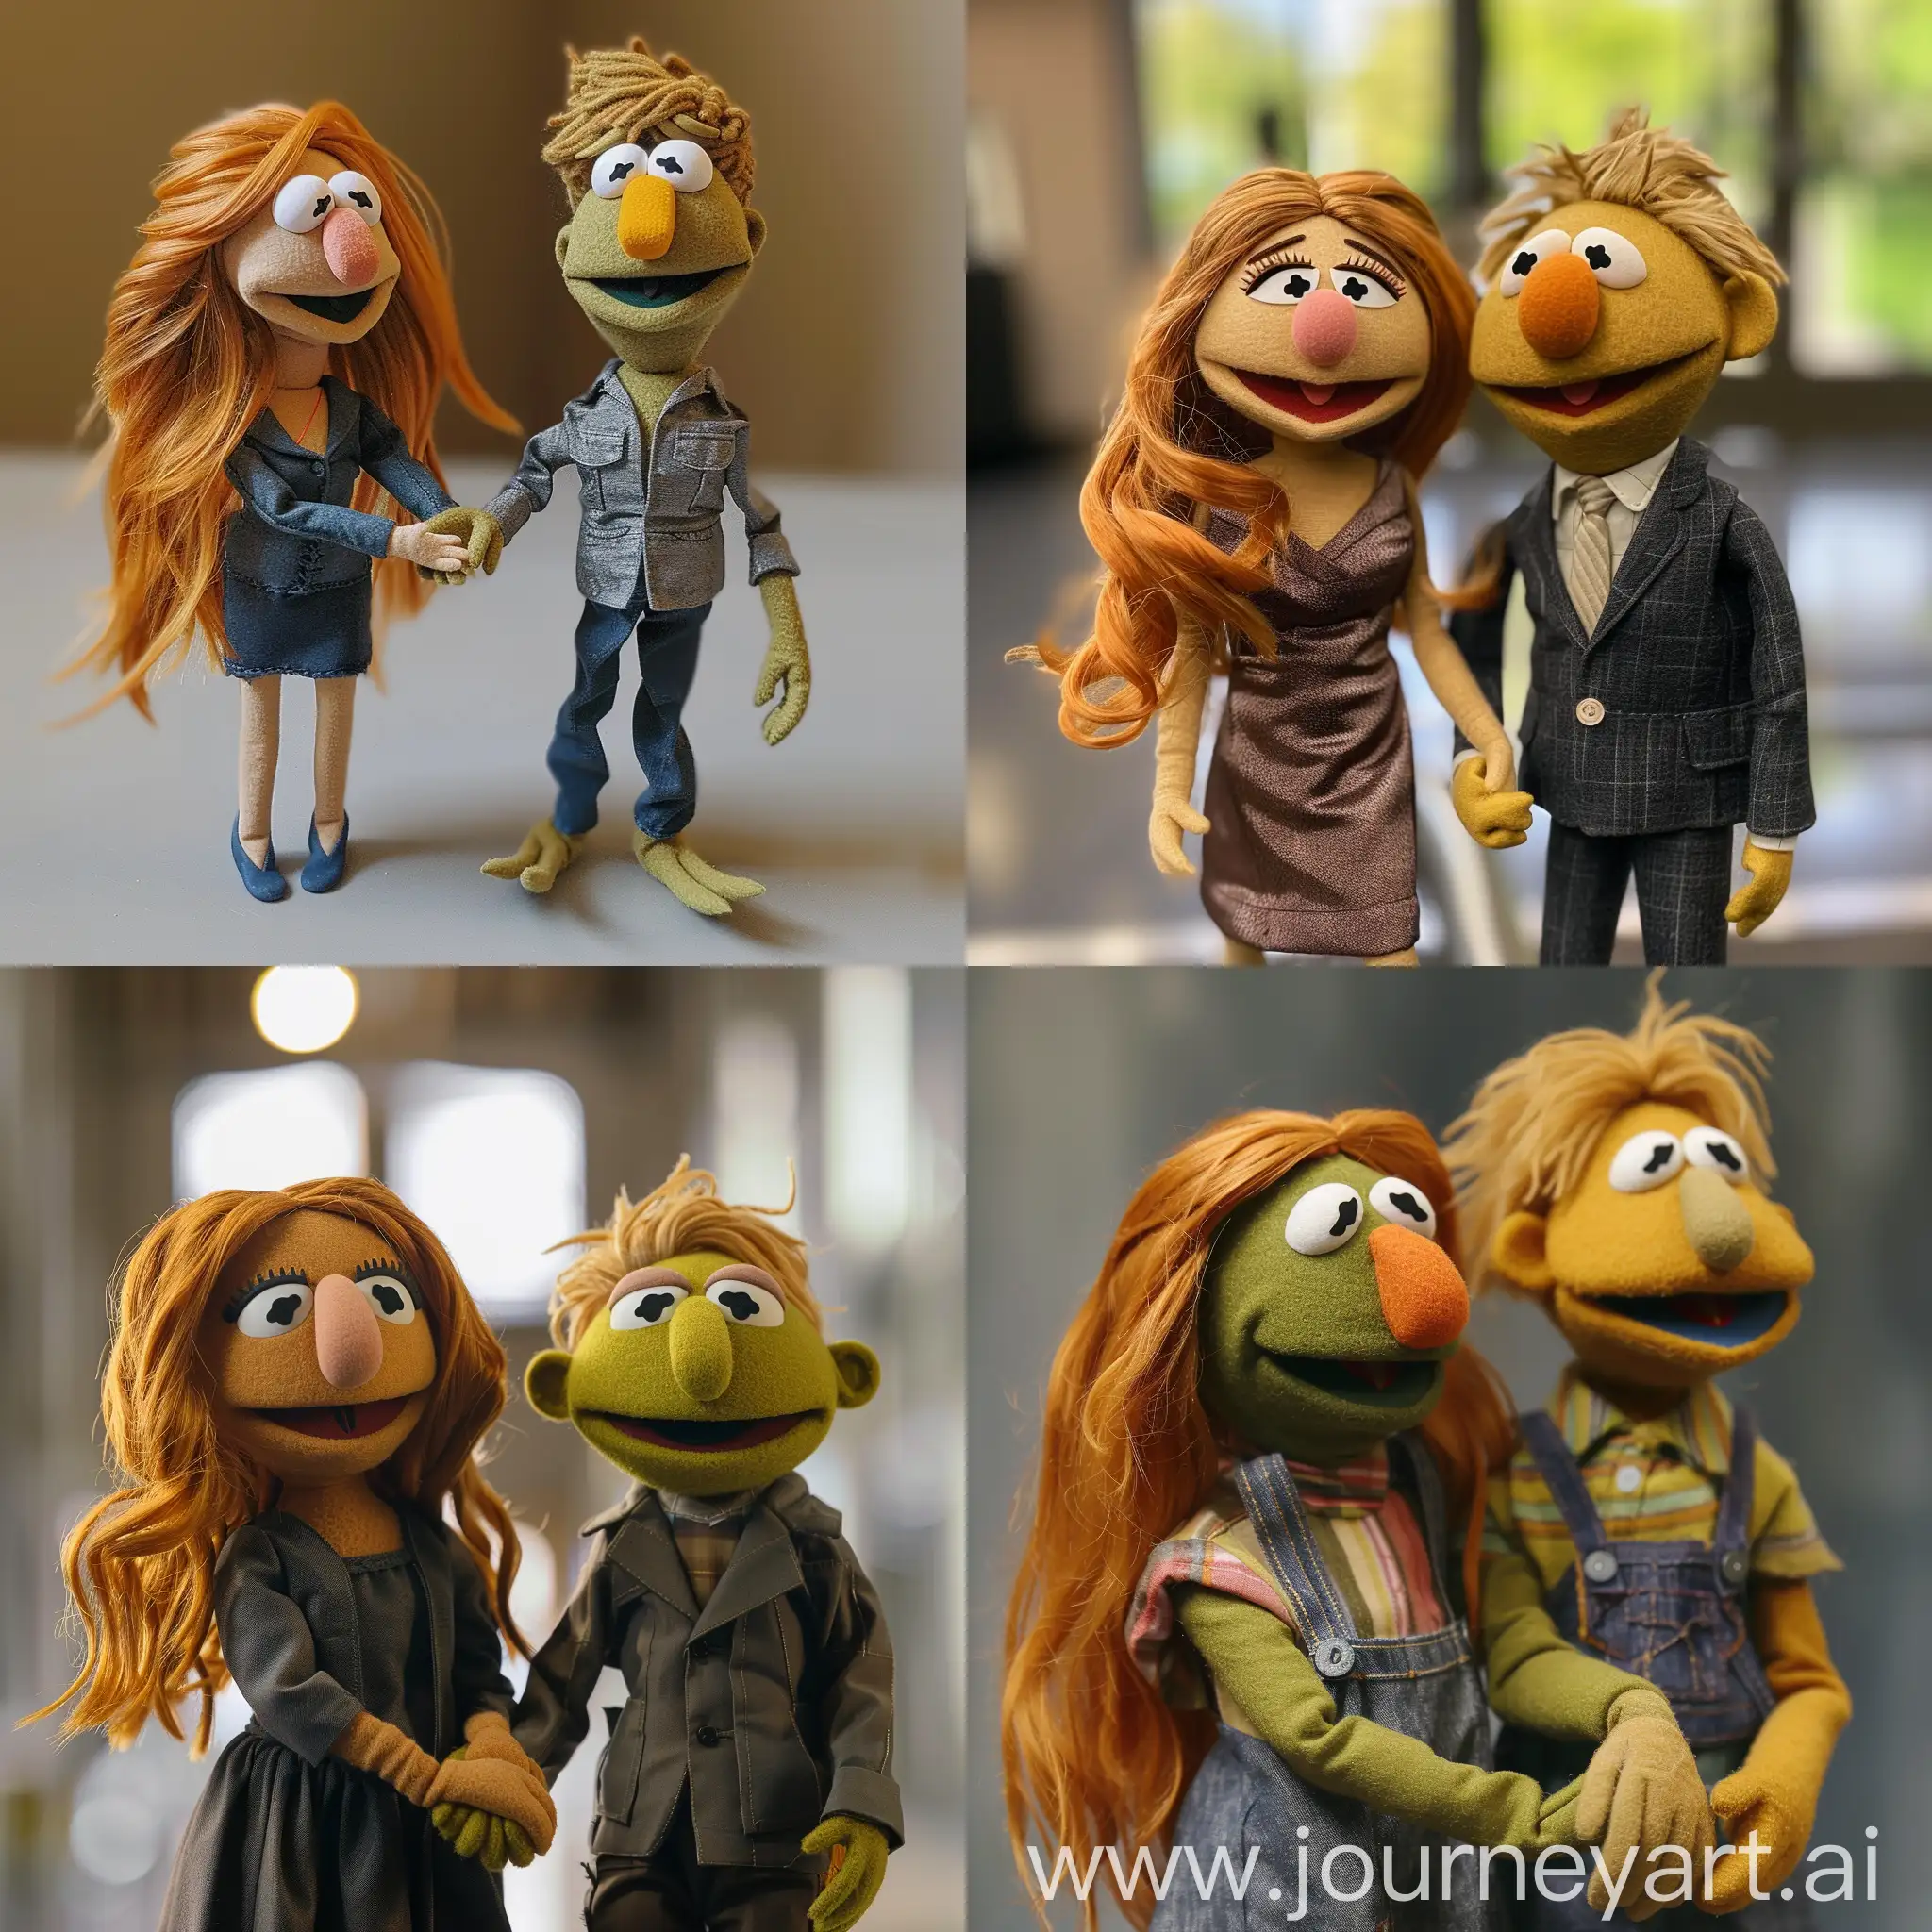 Joyful-Muppet-Couple-Holding-Hands-Colorful-Characters-Inspired-by-Jim-Hensons-Sesame-Street